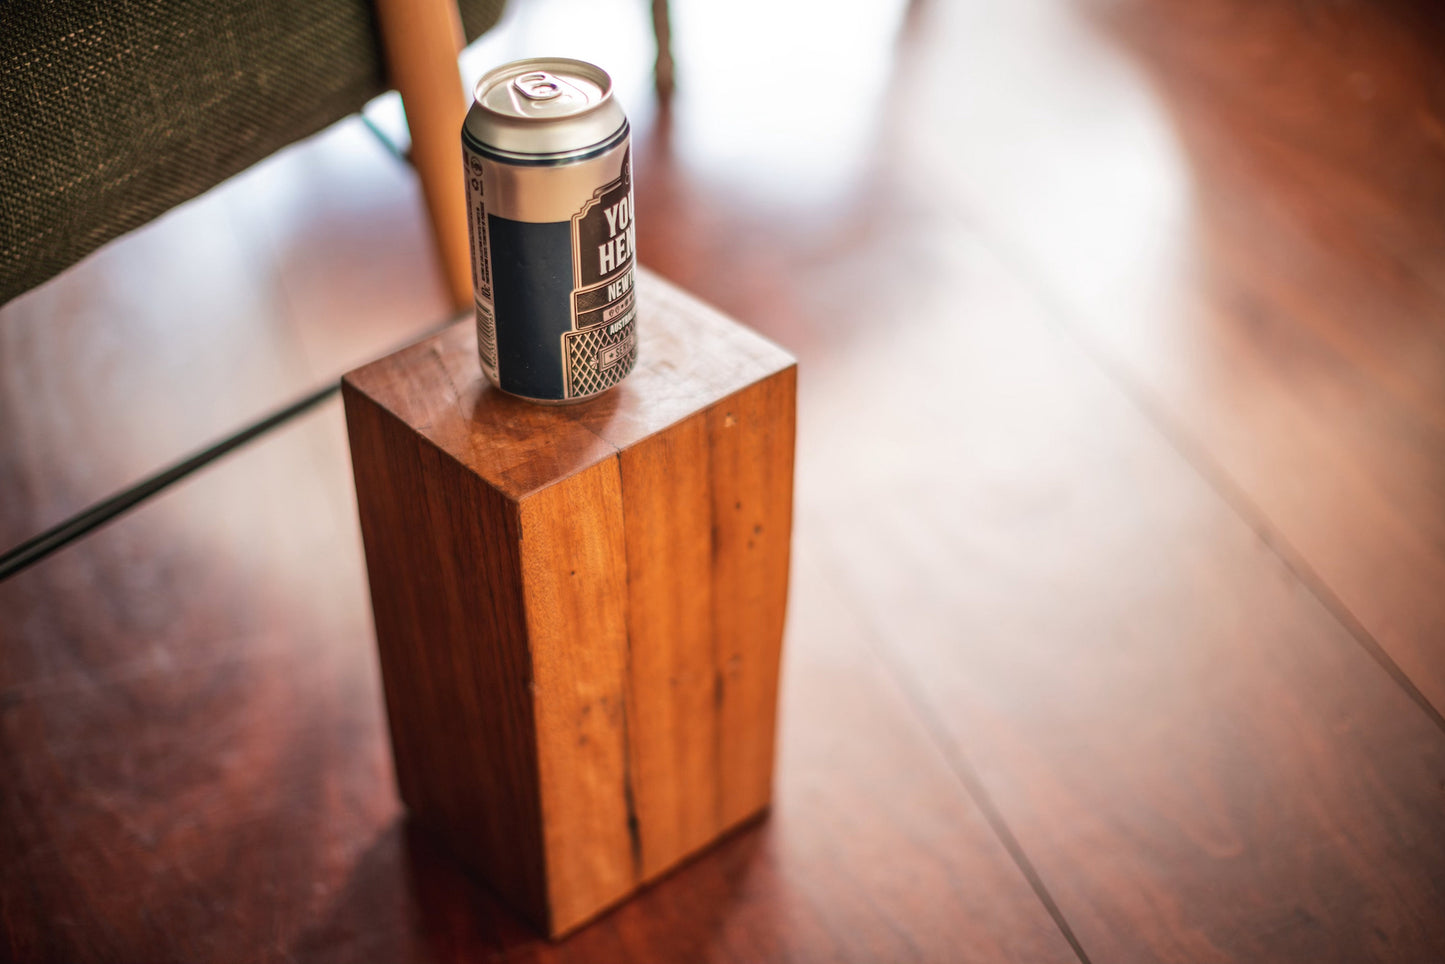 Drink stump / Made from reclaimed timber